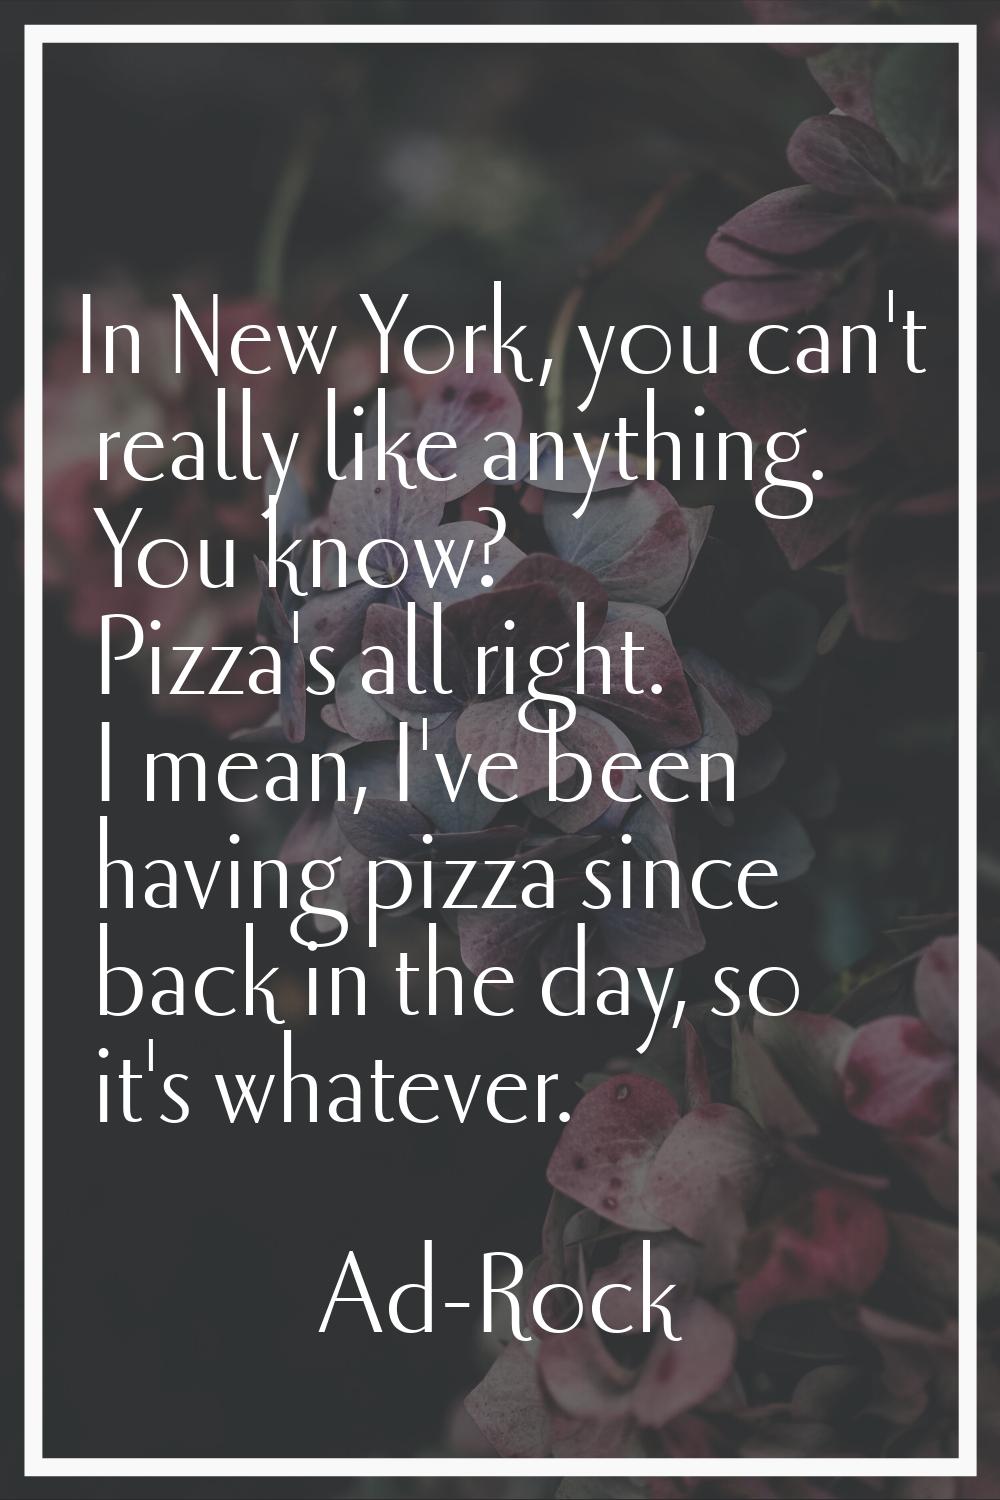 In New York, you can't really like anything. You know? Pizza's all right. I mean, I've been having 